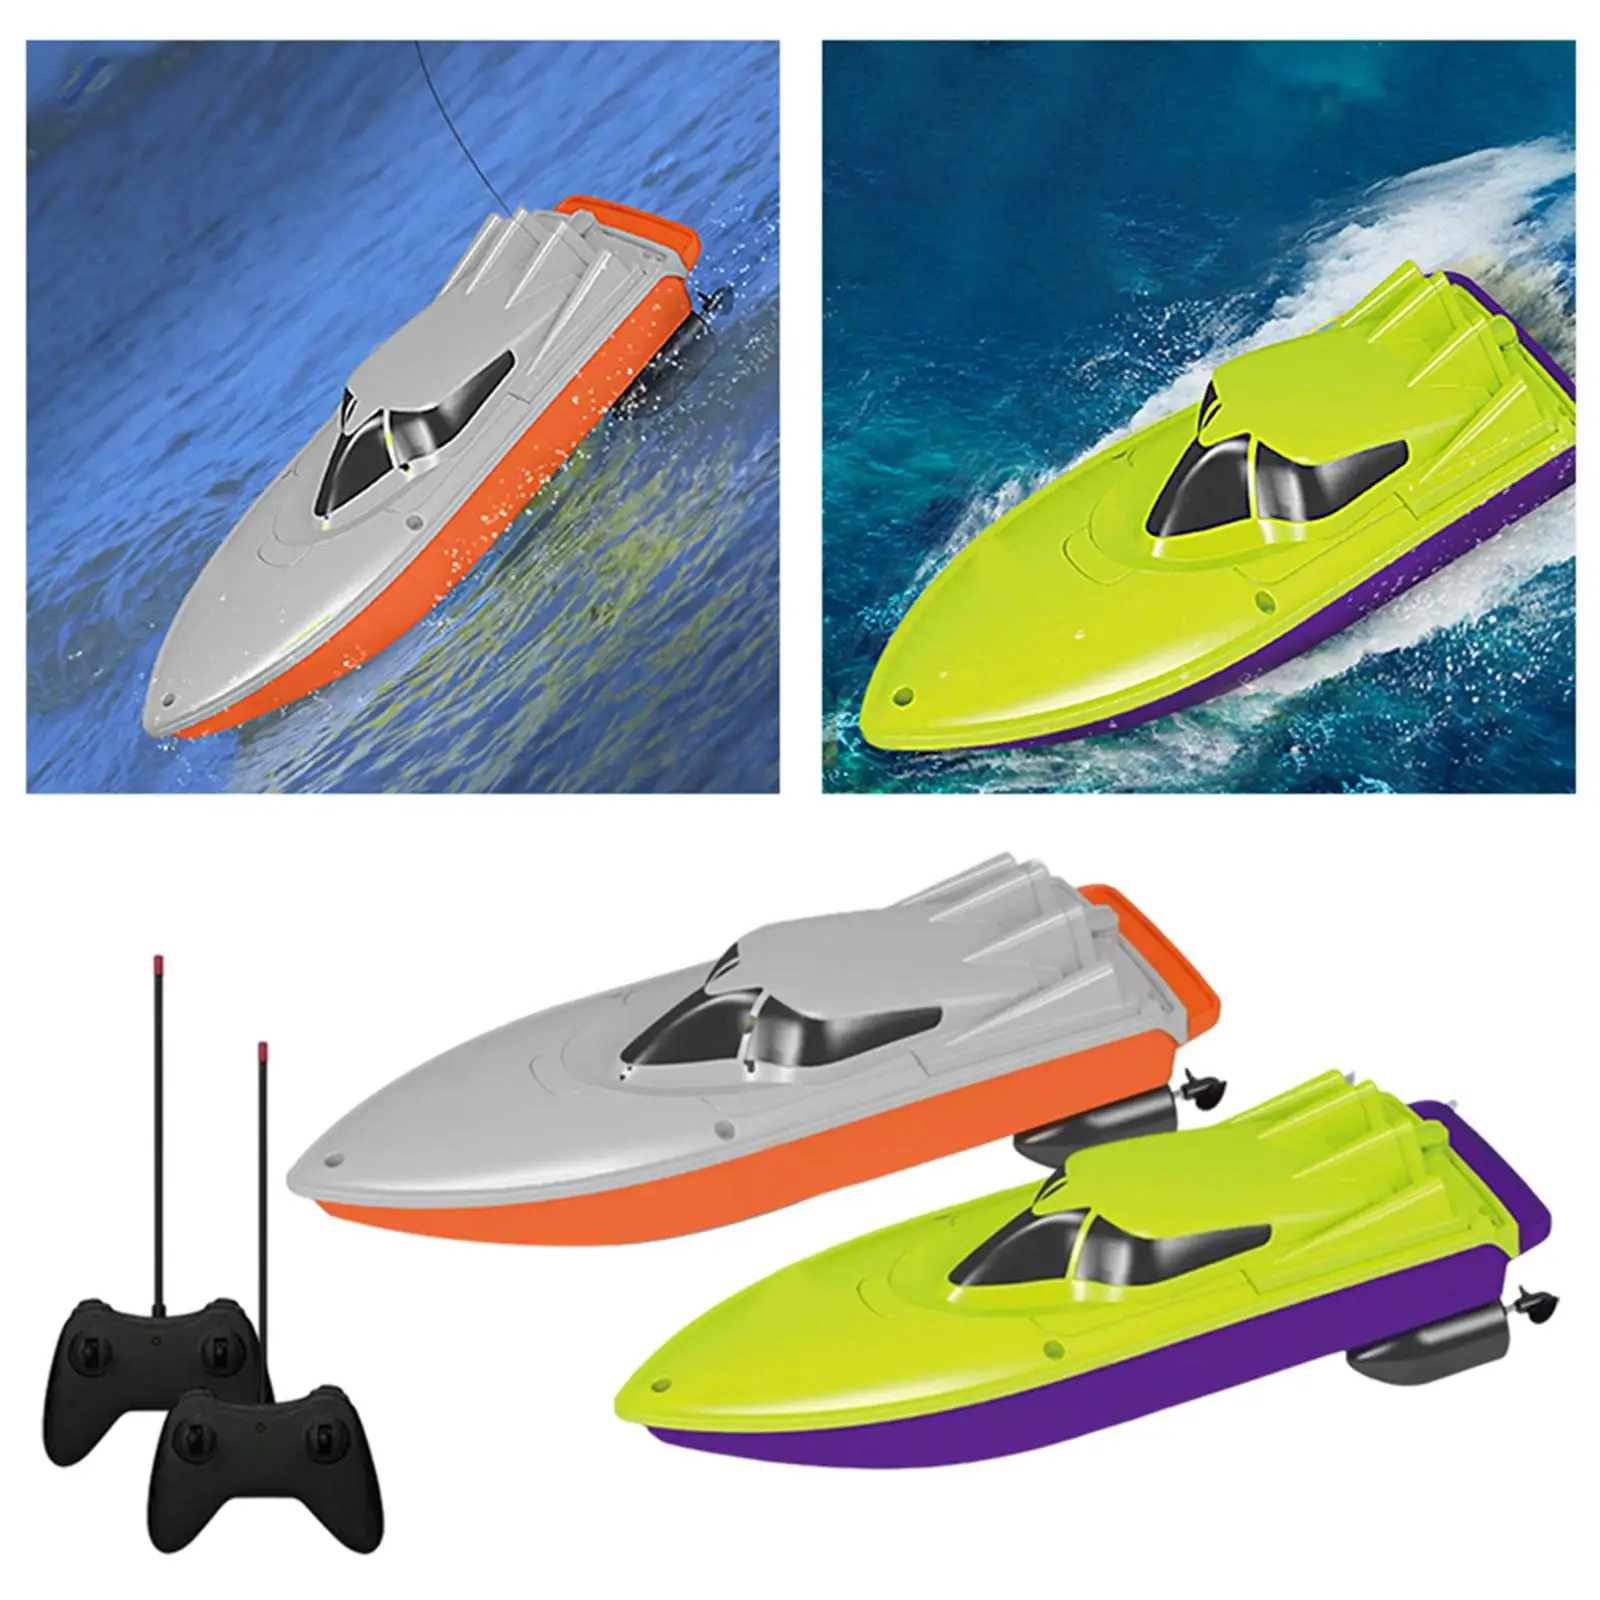 2.4G RC Boat Fast RC Race Boat 10+ MPH for Outdoor Sports Toy, Pools, River,